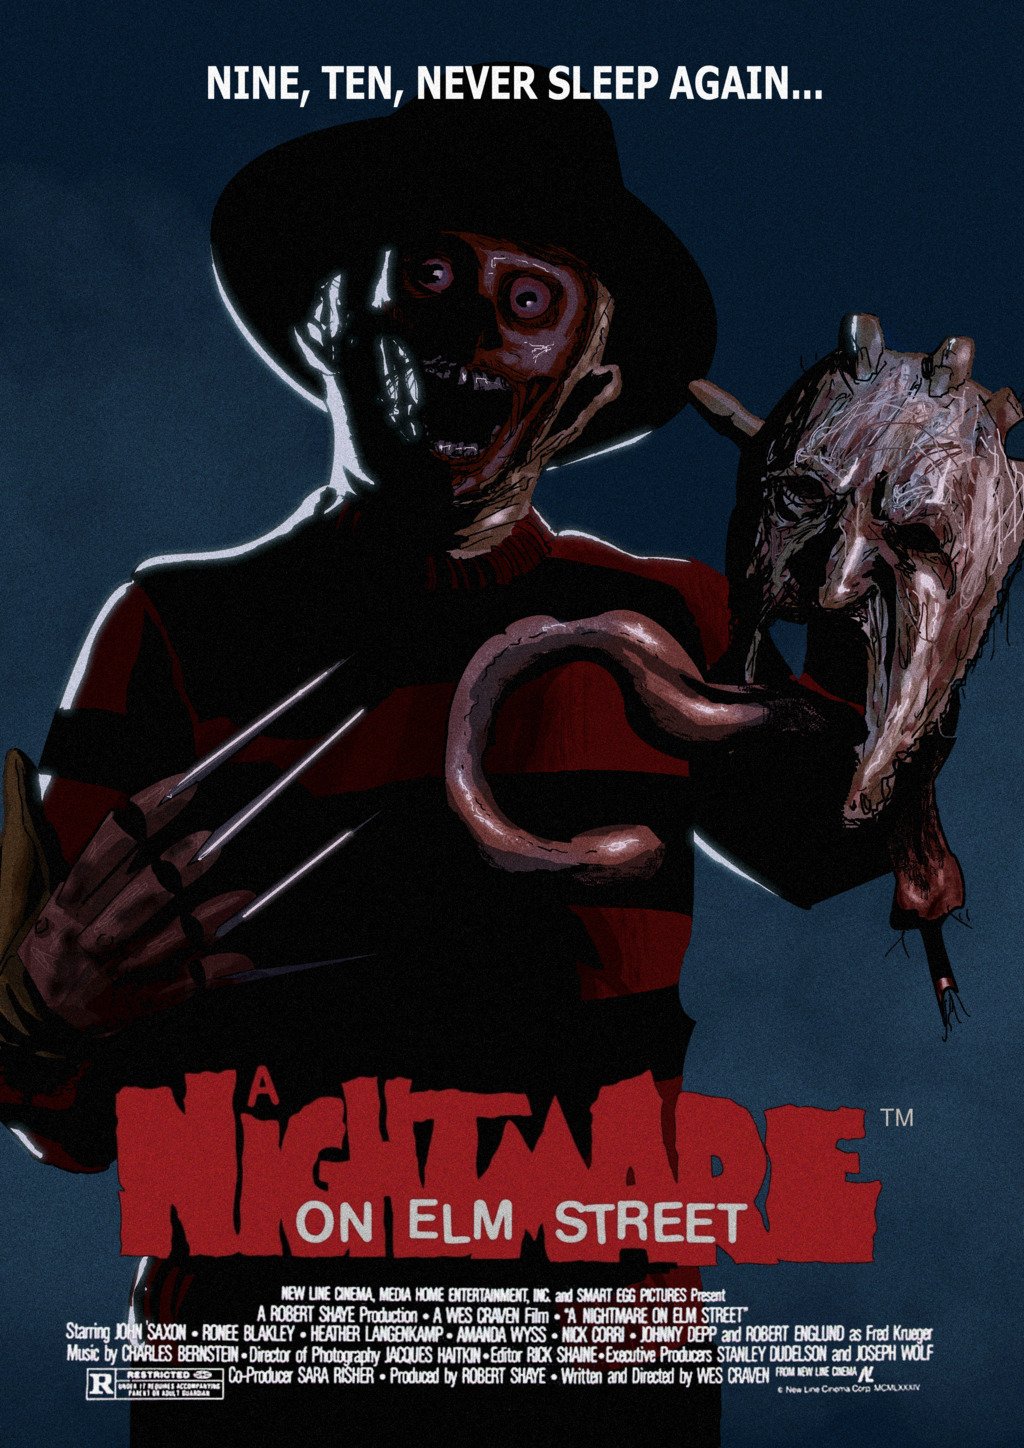 Where Can I Watch A Nightmare On Elm Street A Nightmare on Elm Street (1984) Movie Poster - ID: 42947 - Image Abyss